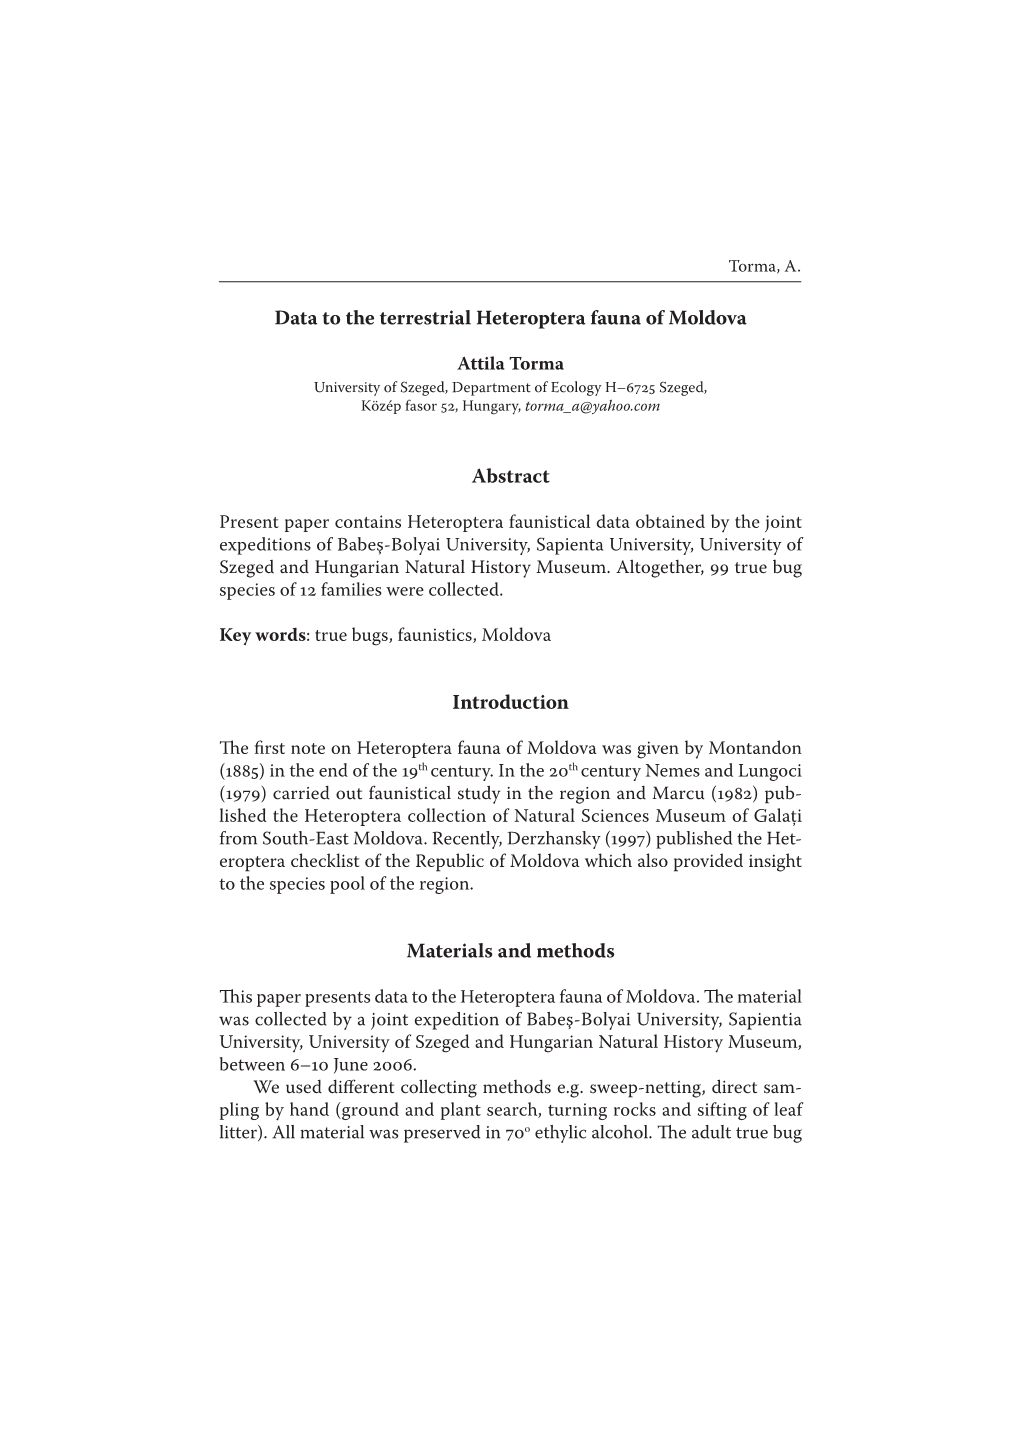 Data to the Terrestrial Heteroptera Fauna of Moldova Abstract Introduction Materials and Methods